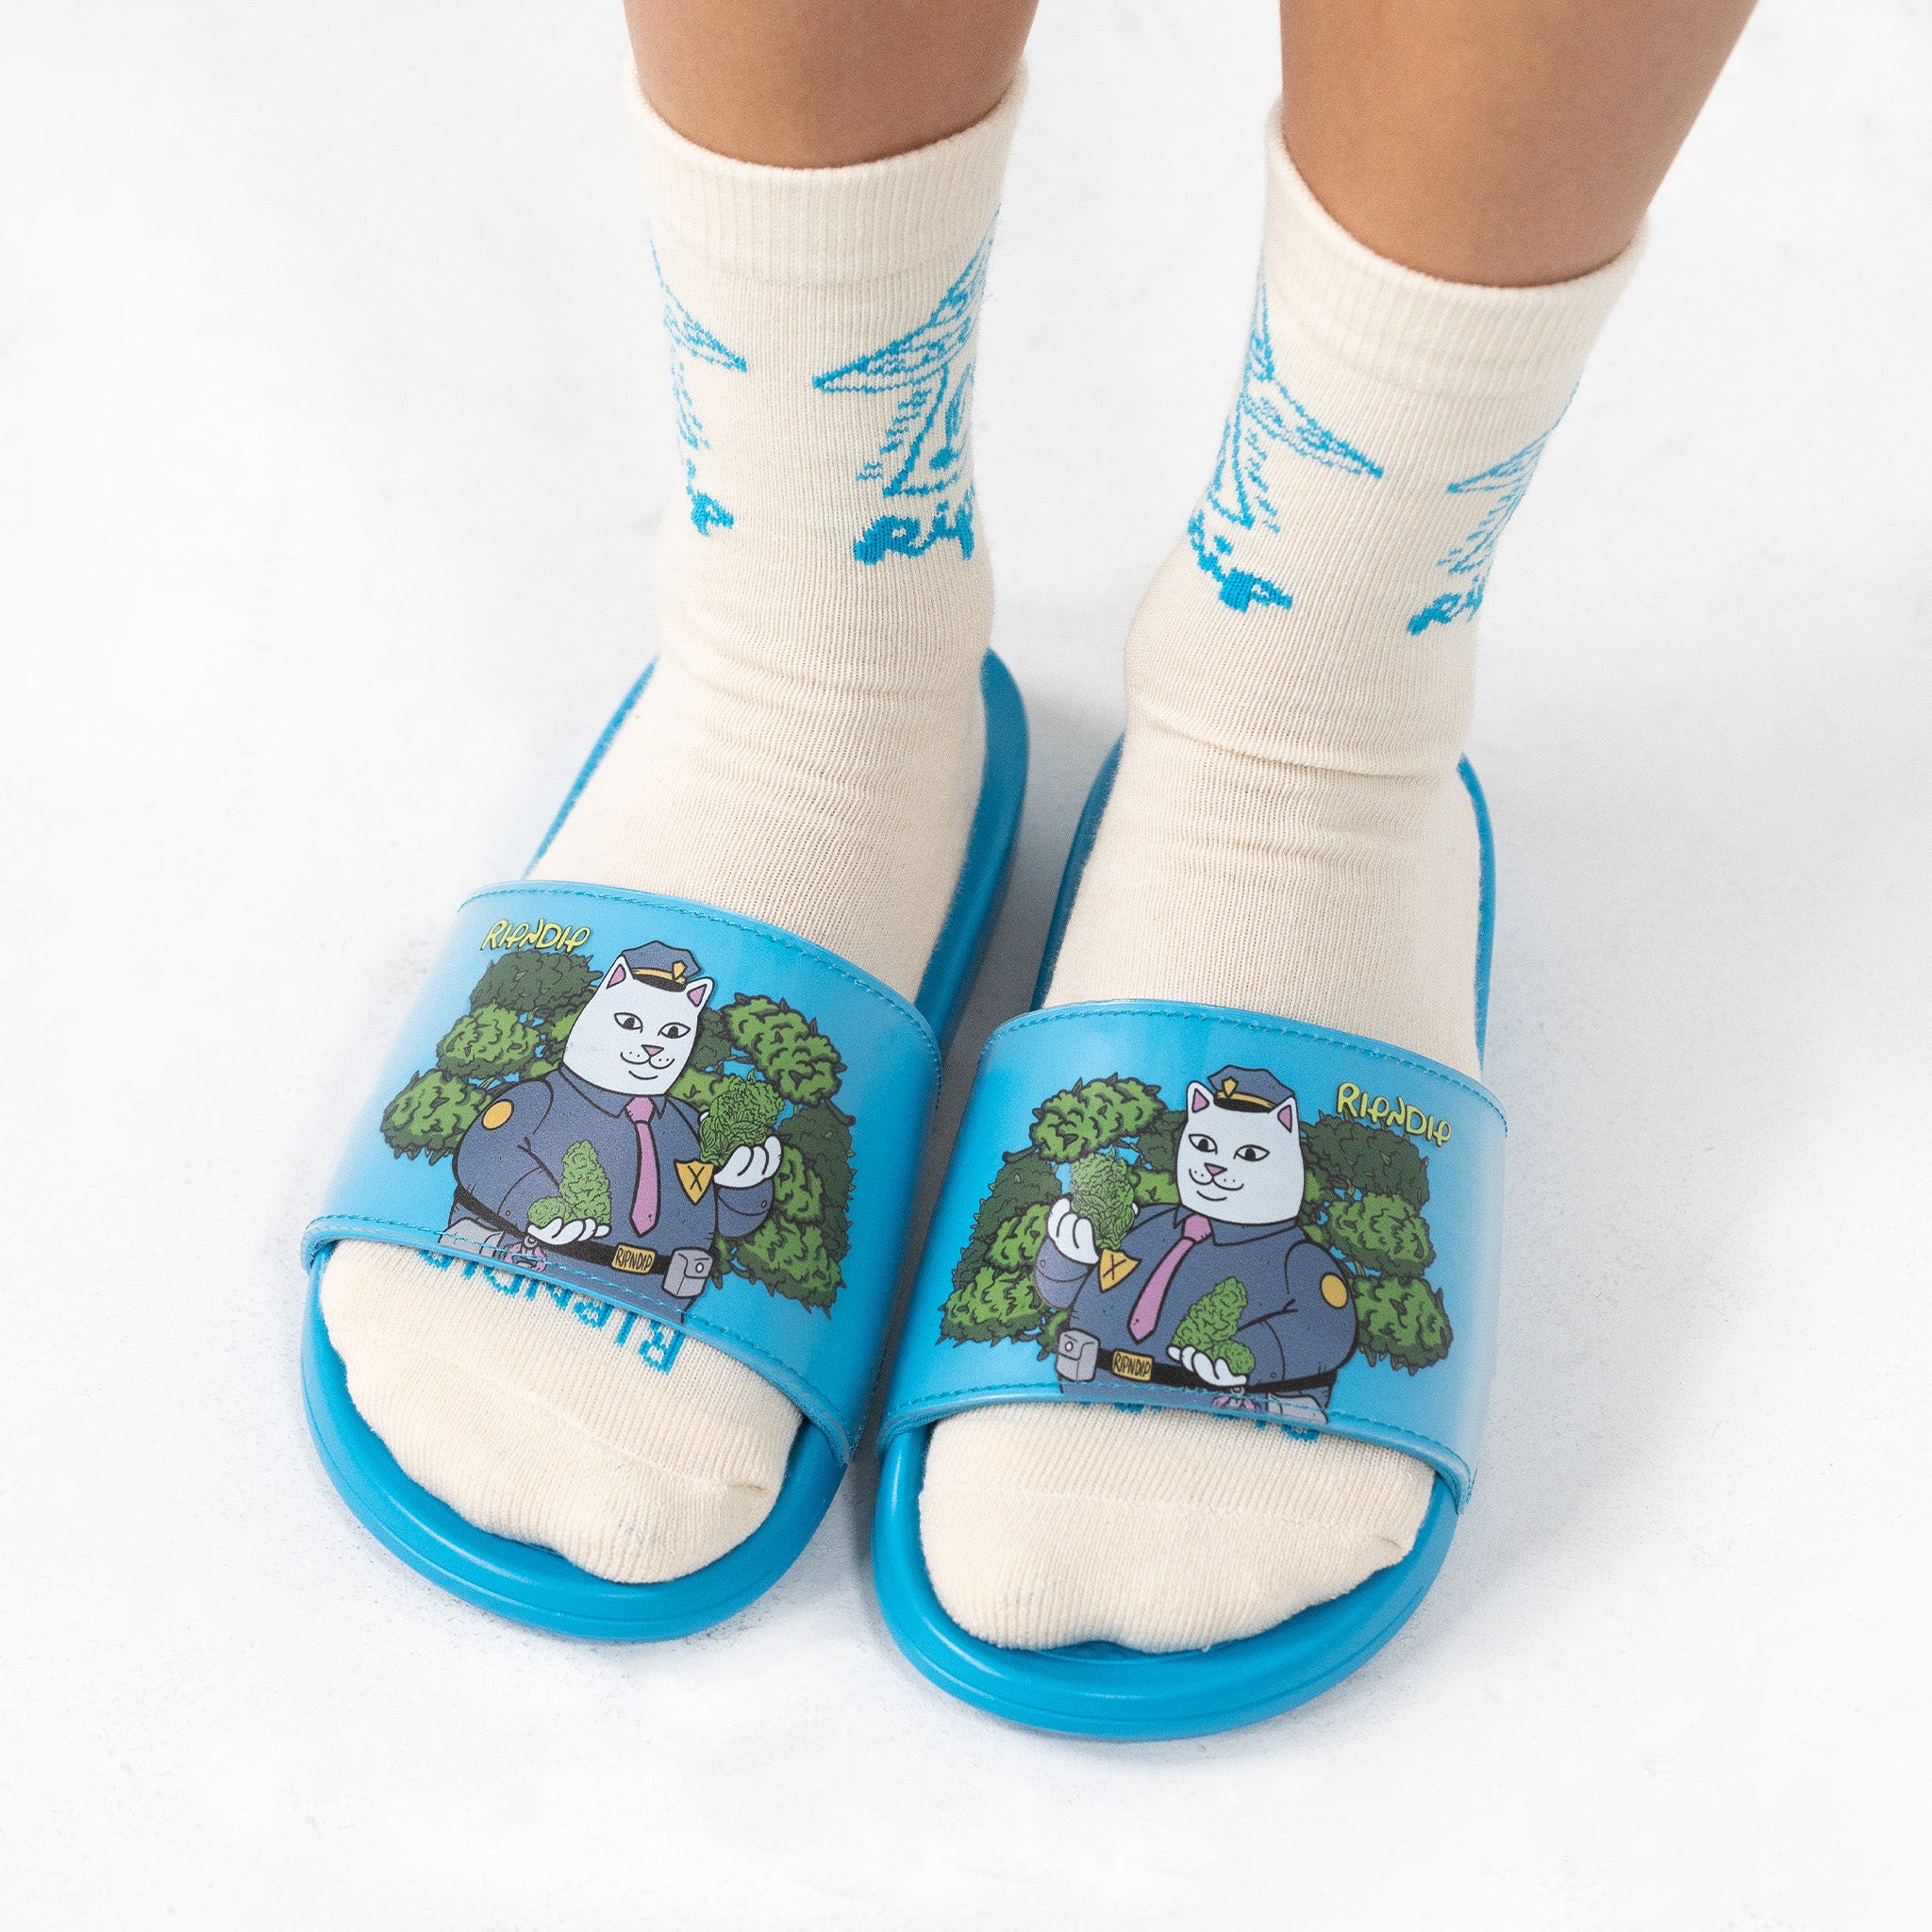 RIPNDIP Confiscated Slides (Blue)